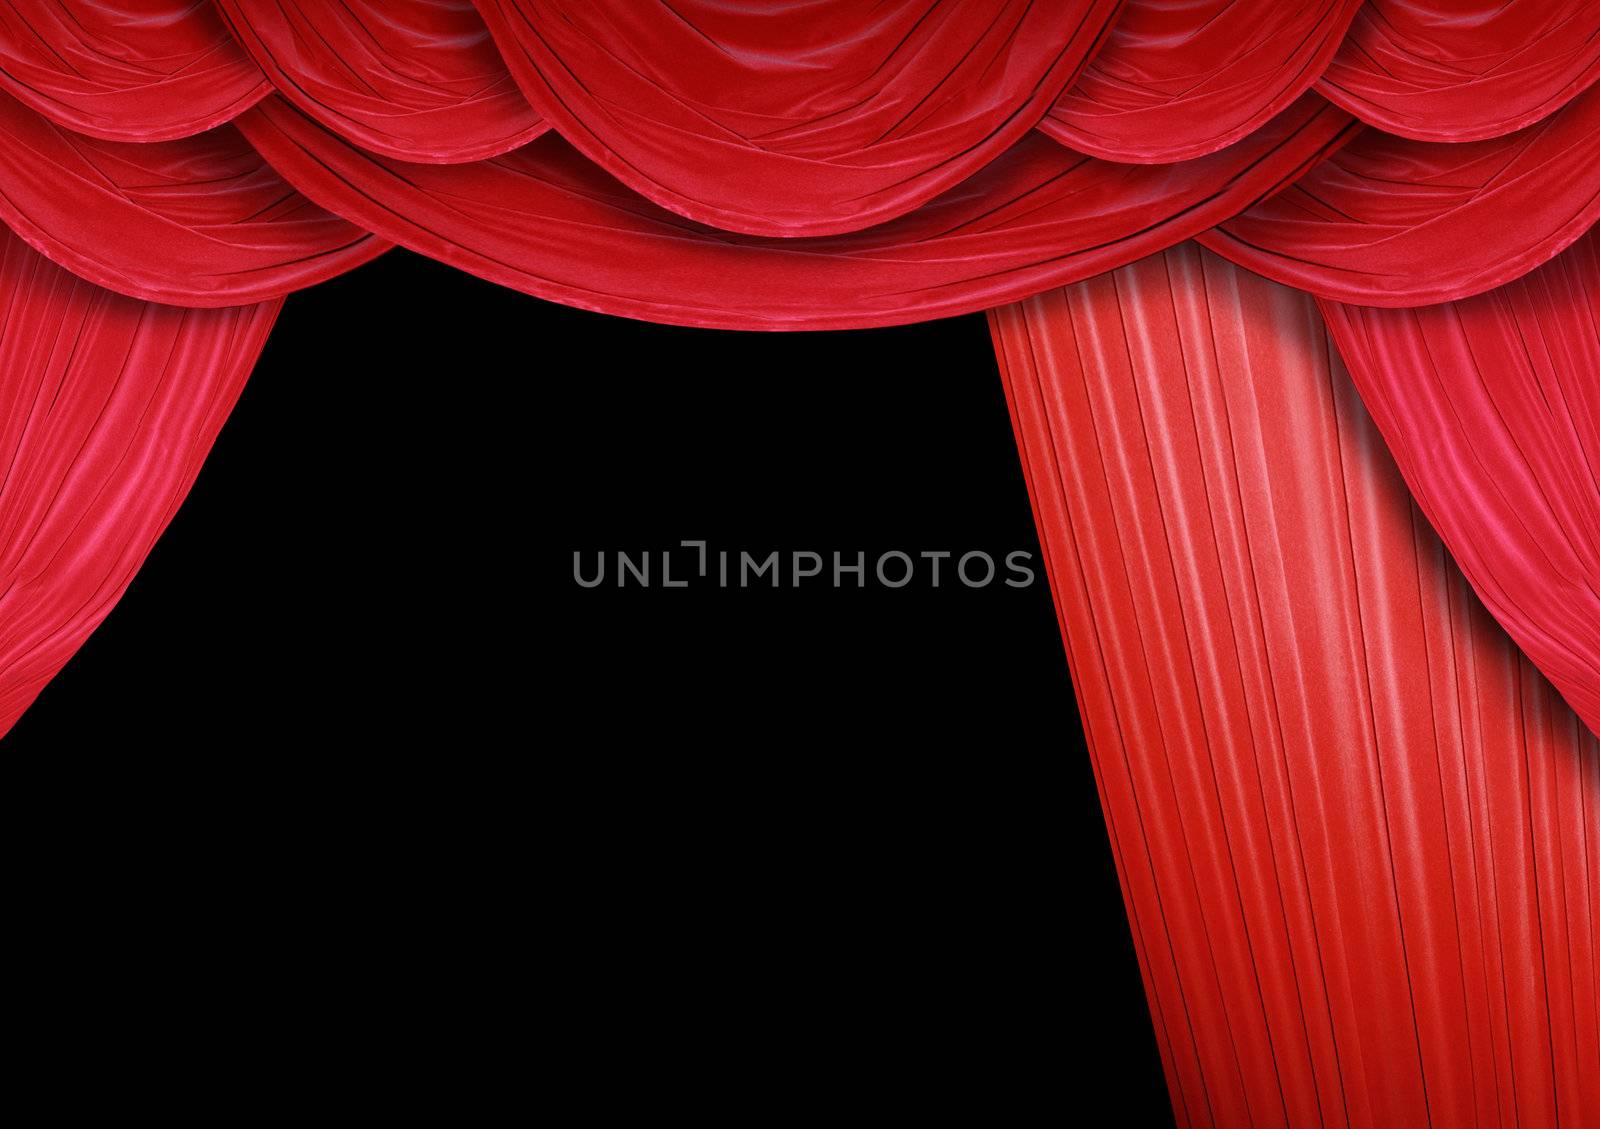 Red curtain of a classical theater 